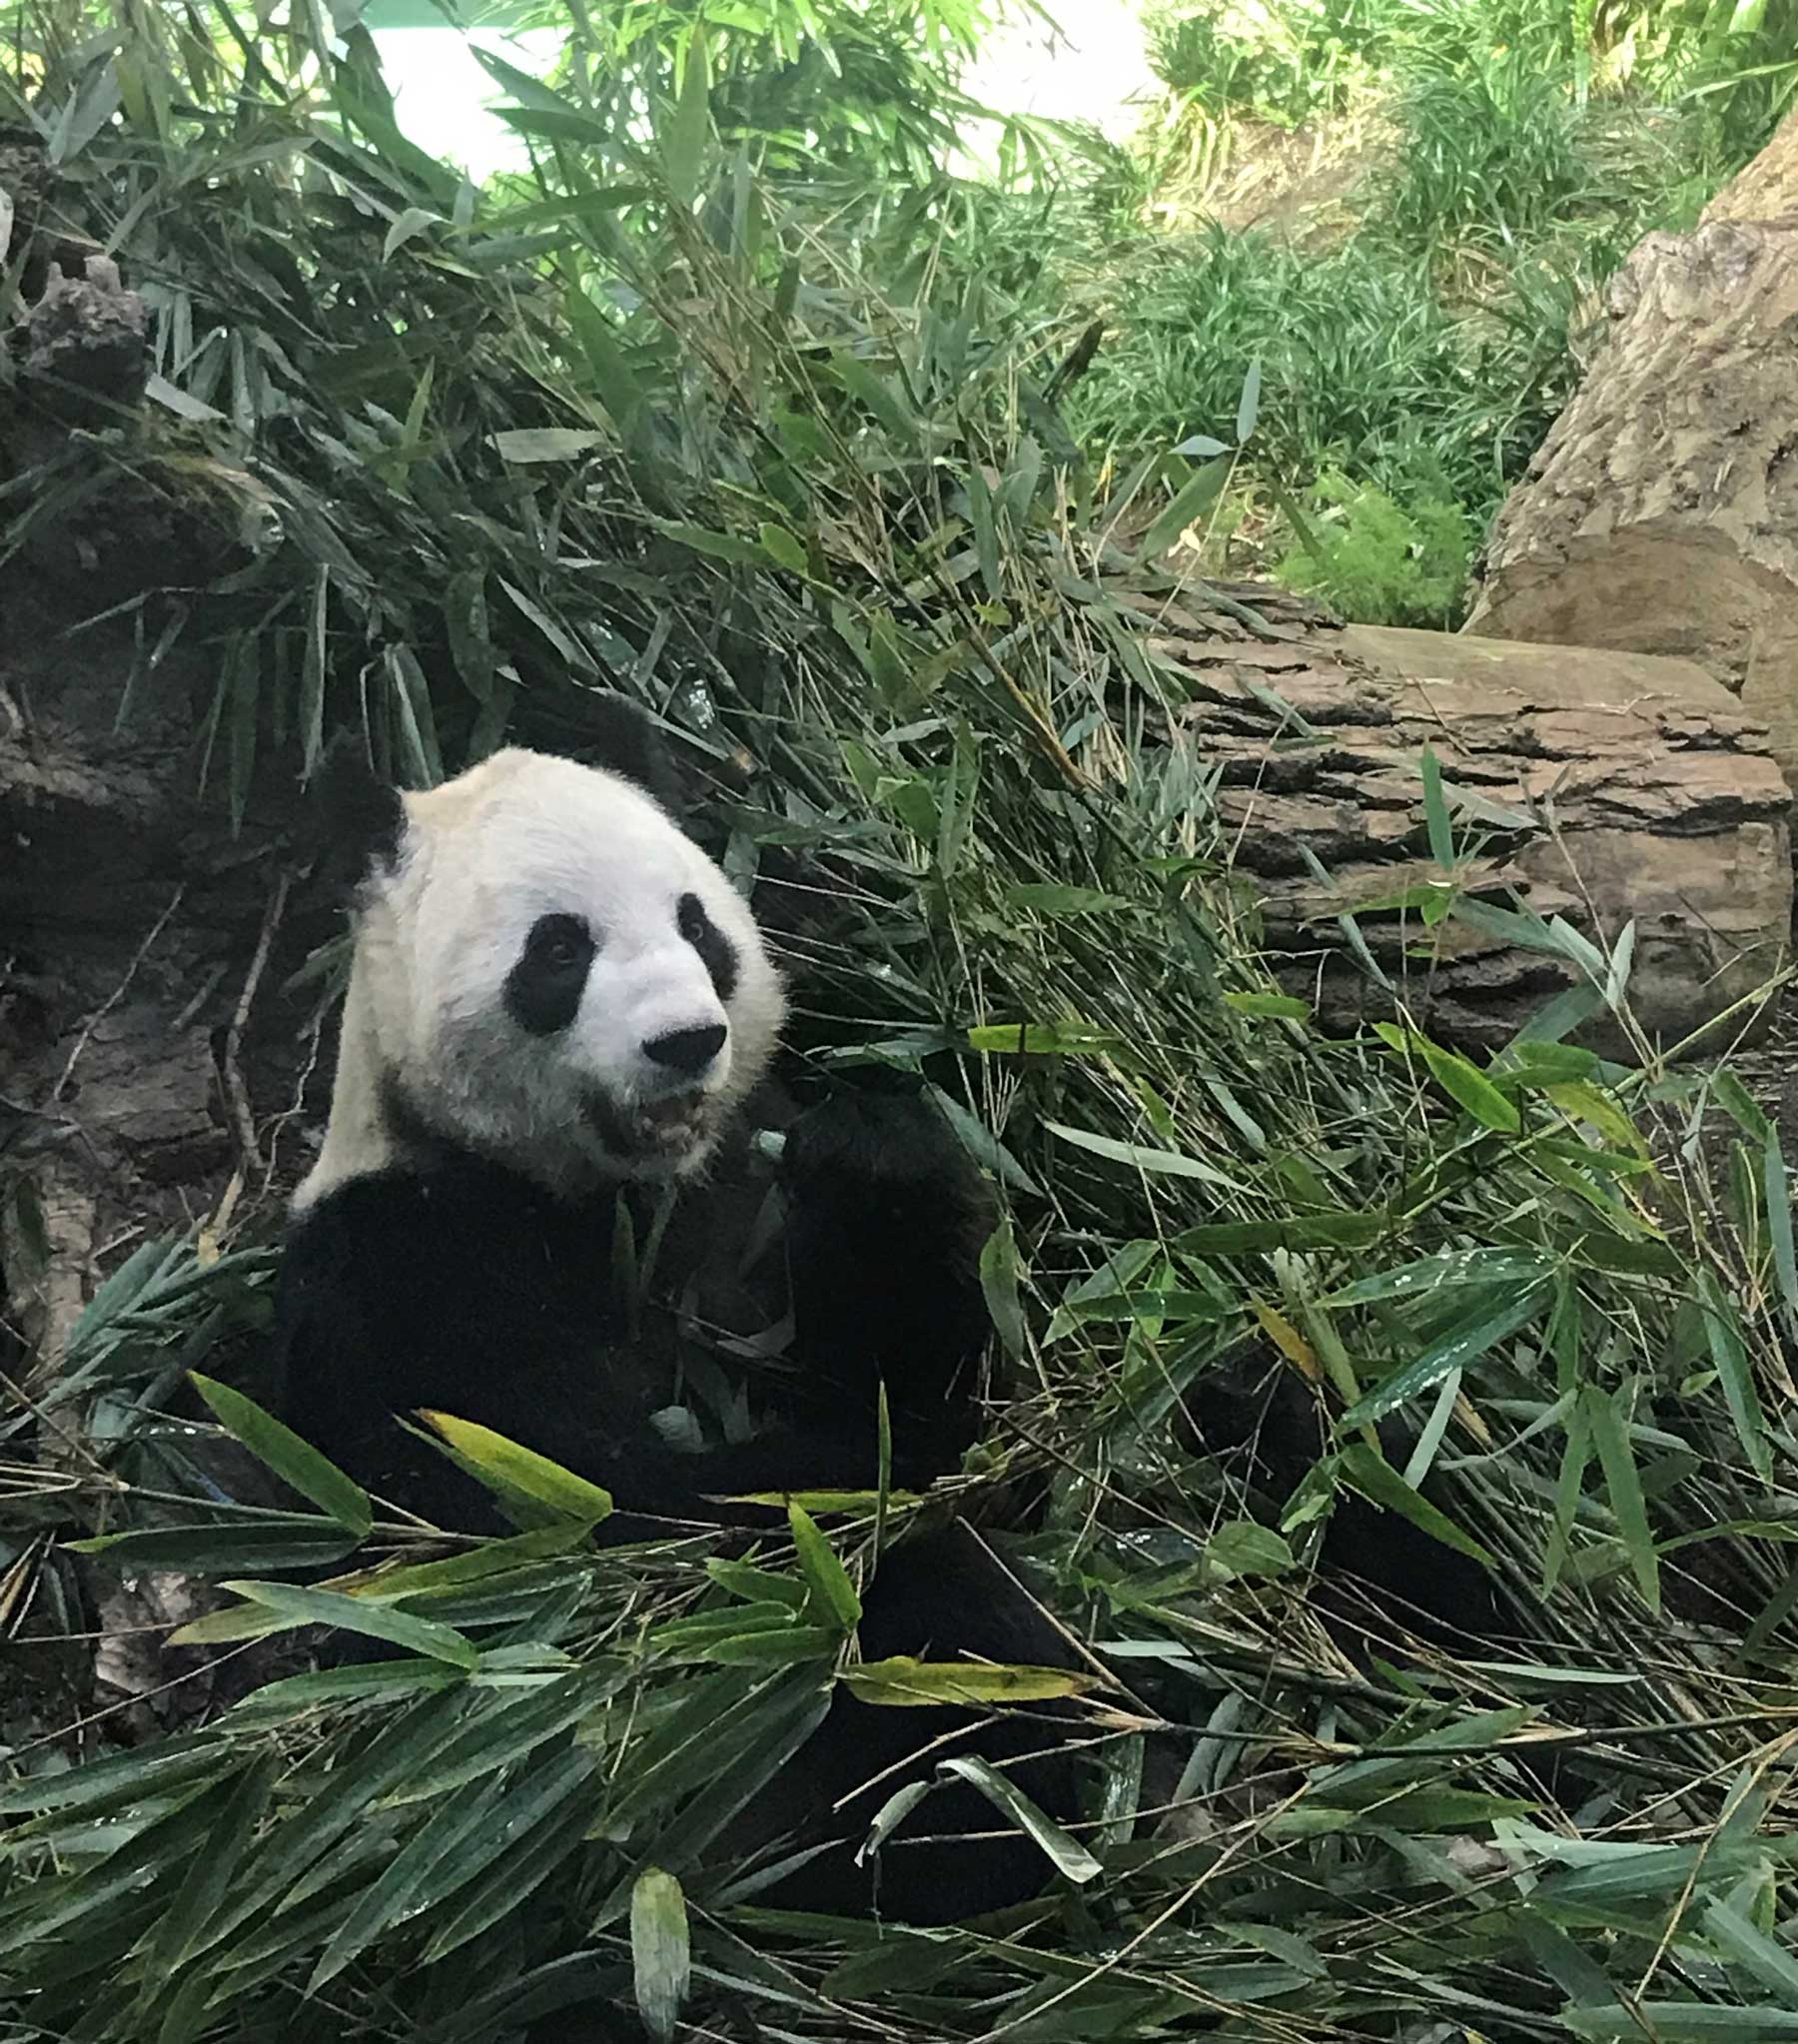 One of the four pandas at Calgary Zoo